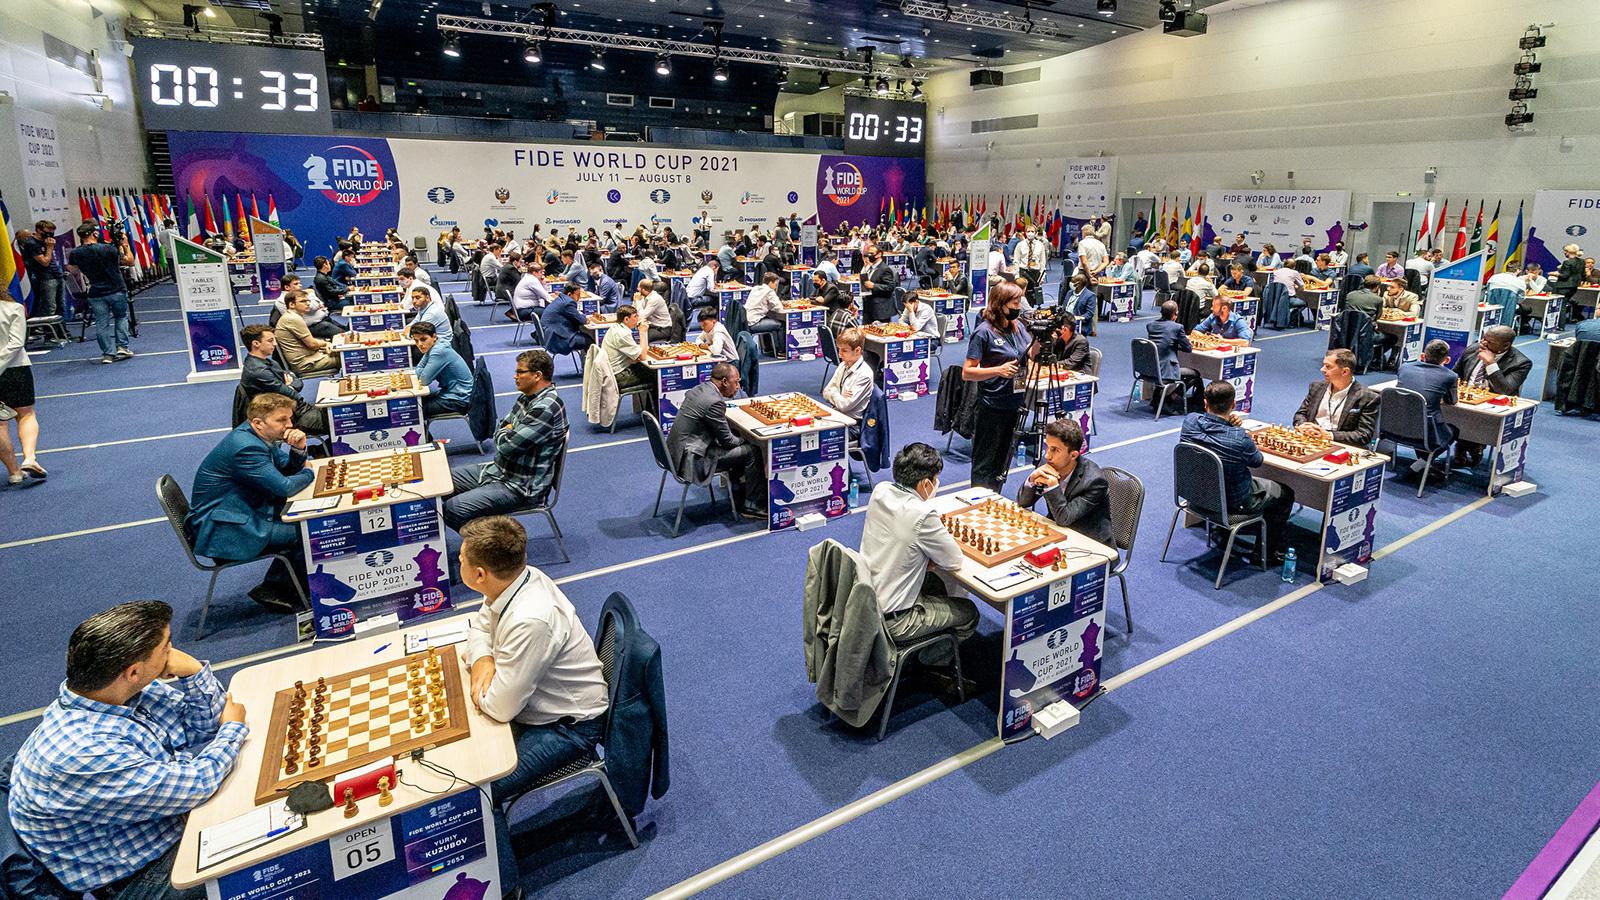 FIDE World Cup 2021 pairings are out